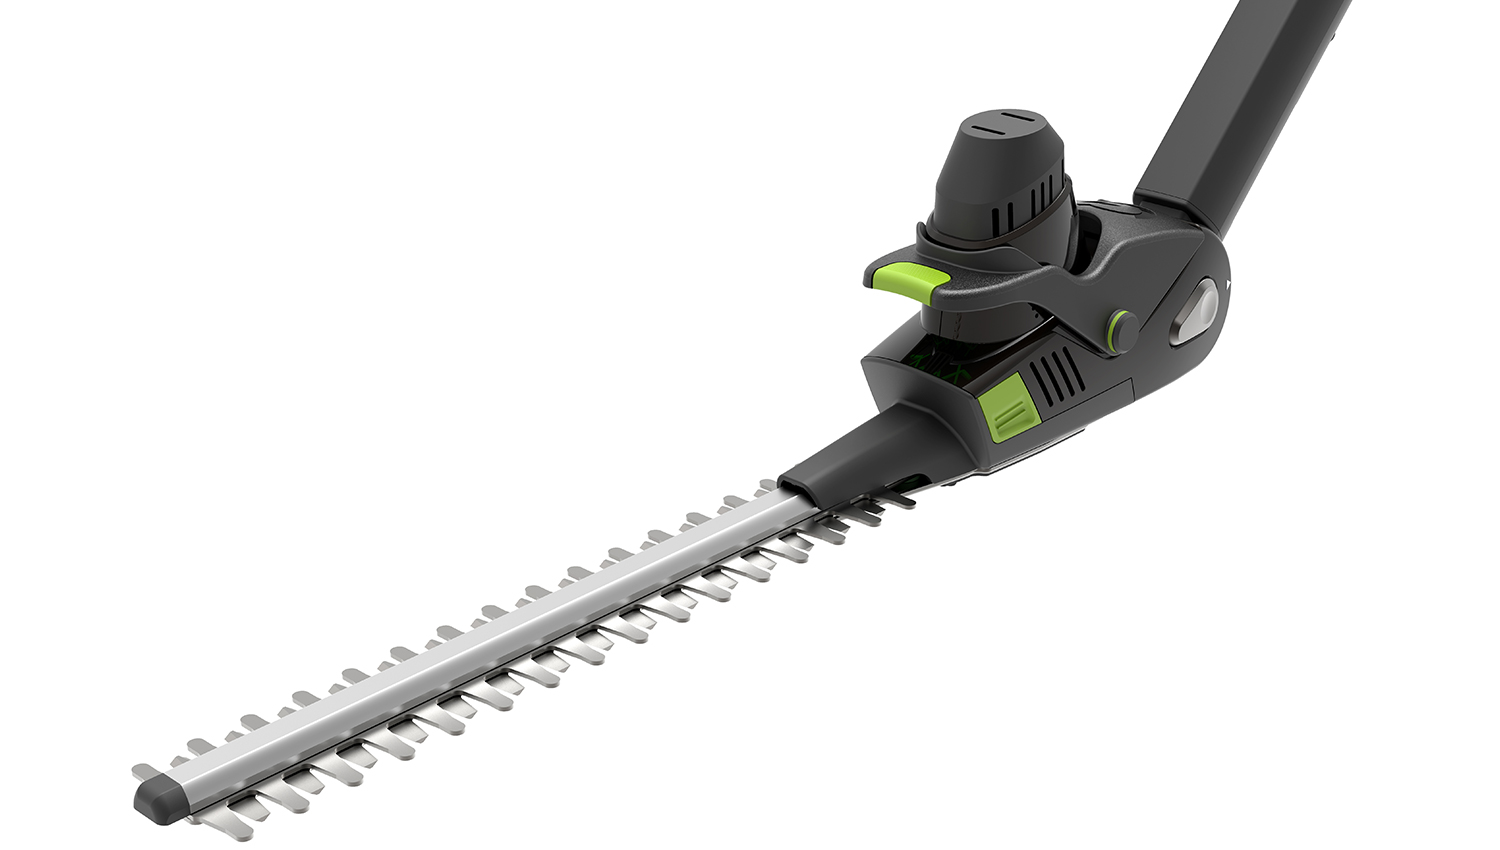 long handle cordless hedge trimmer